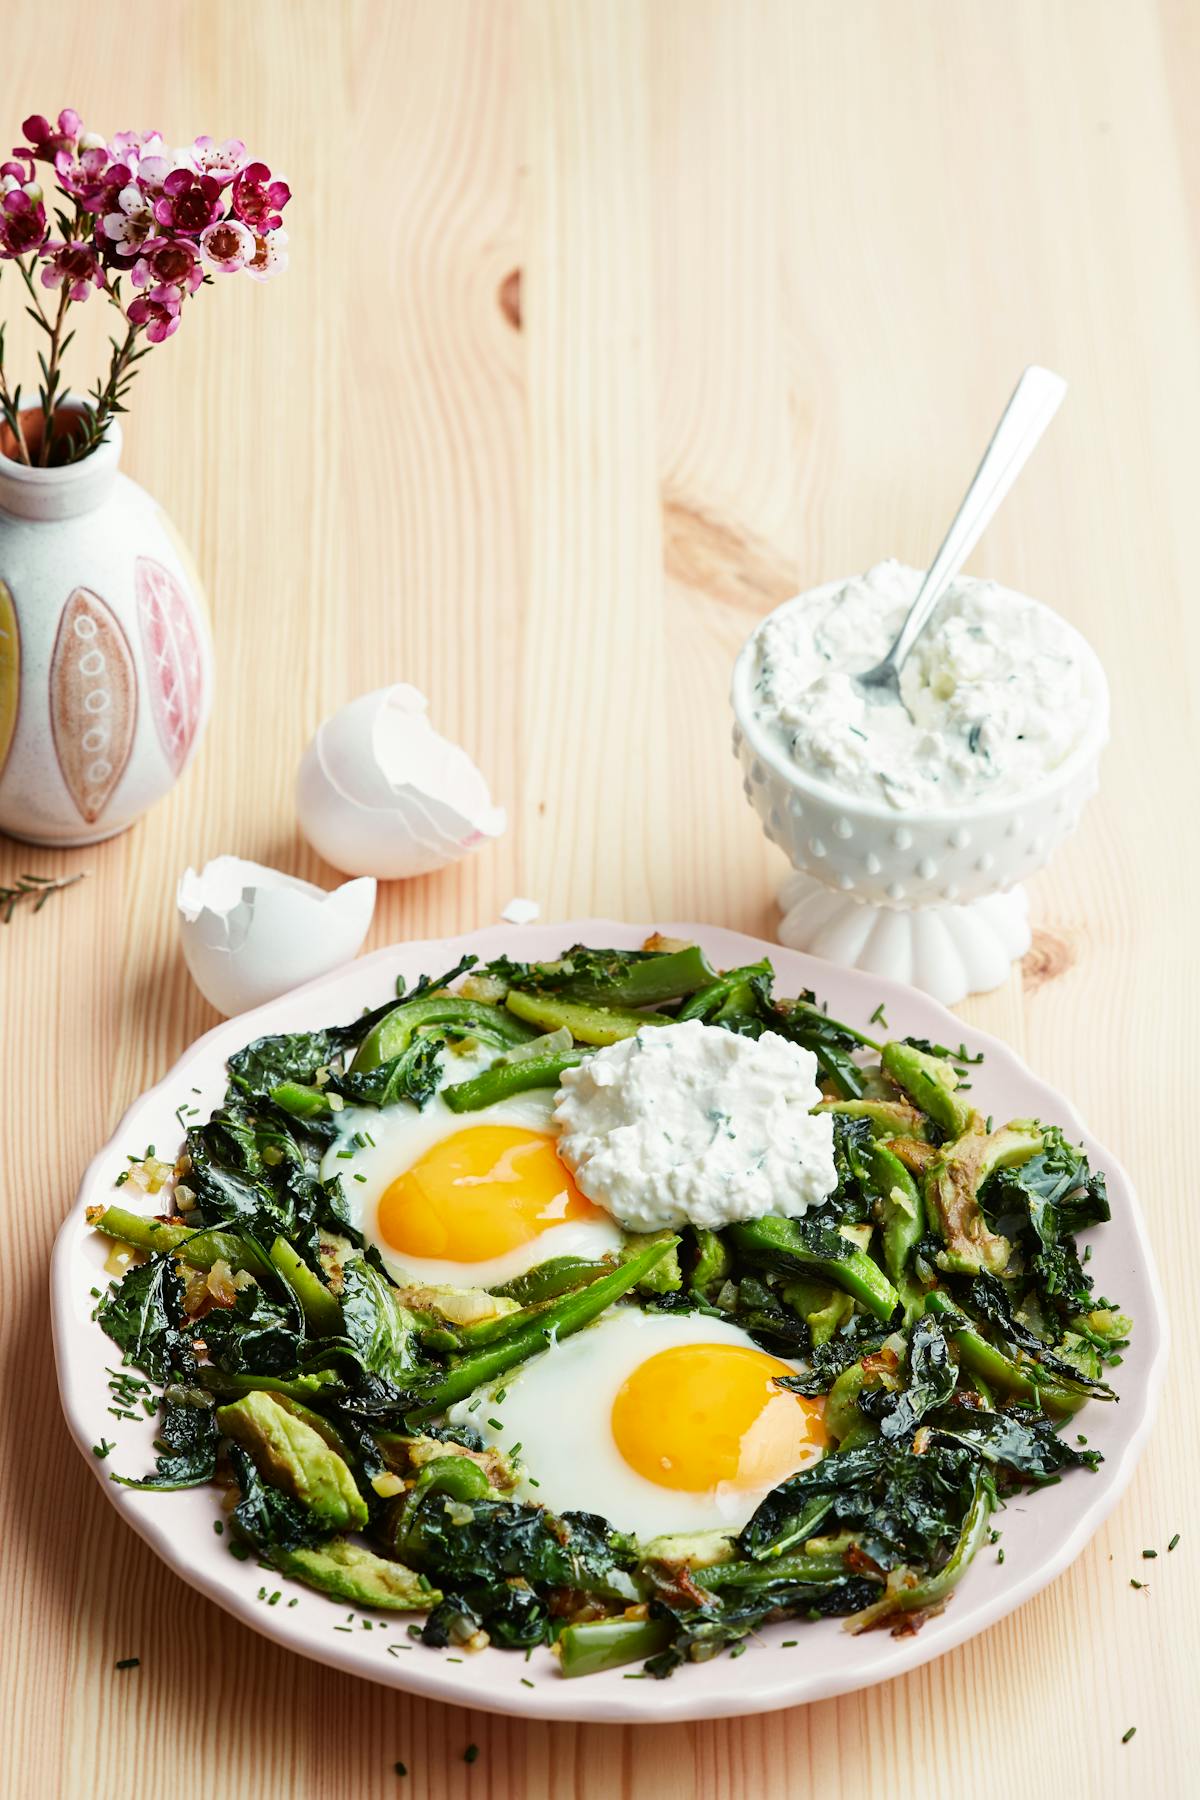 Skillet eggs and greens